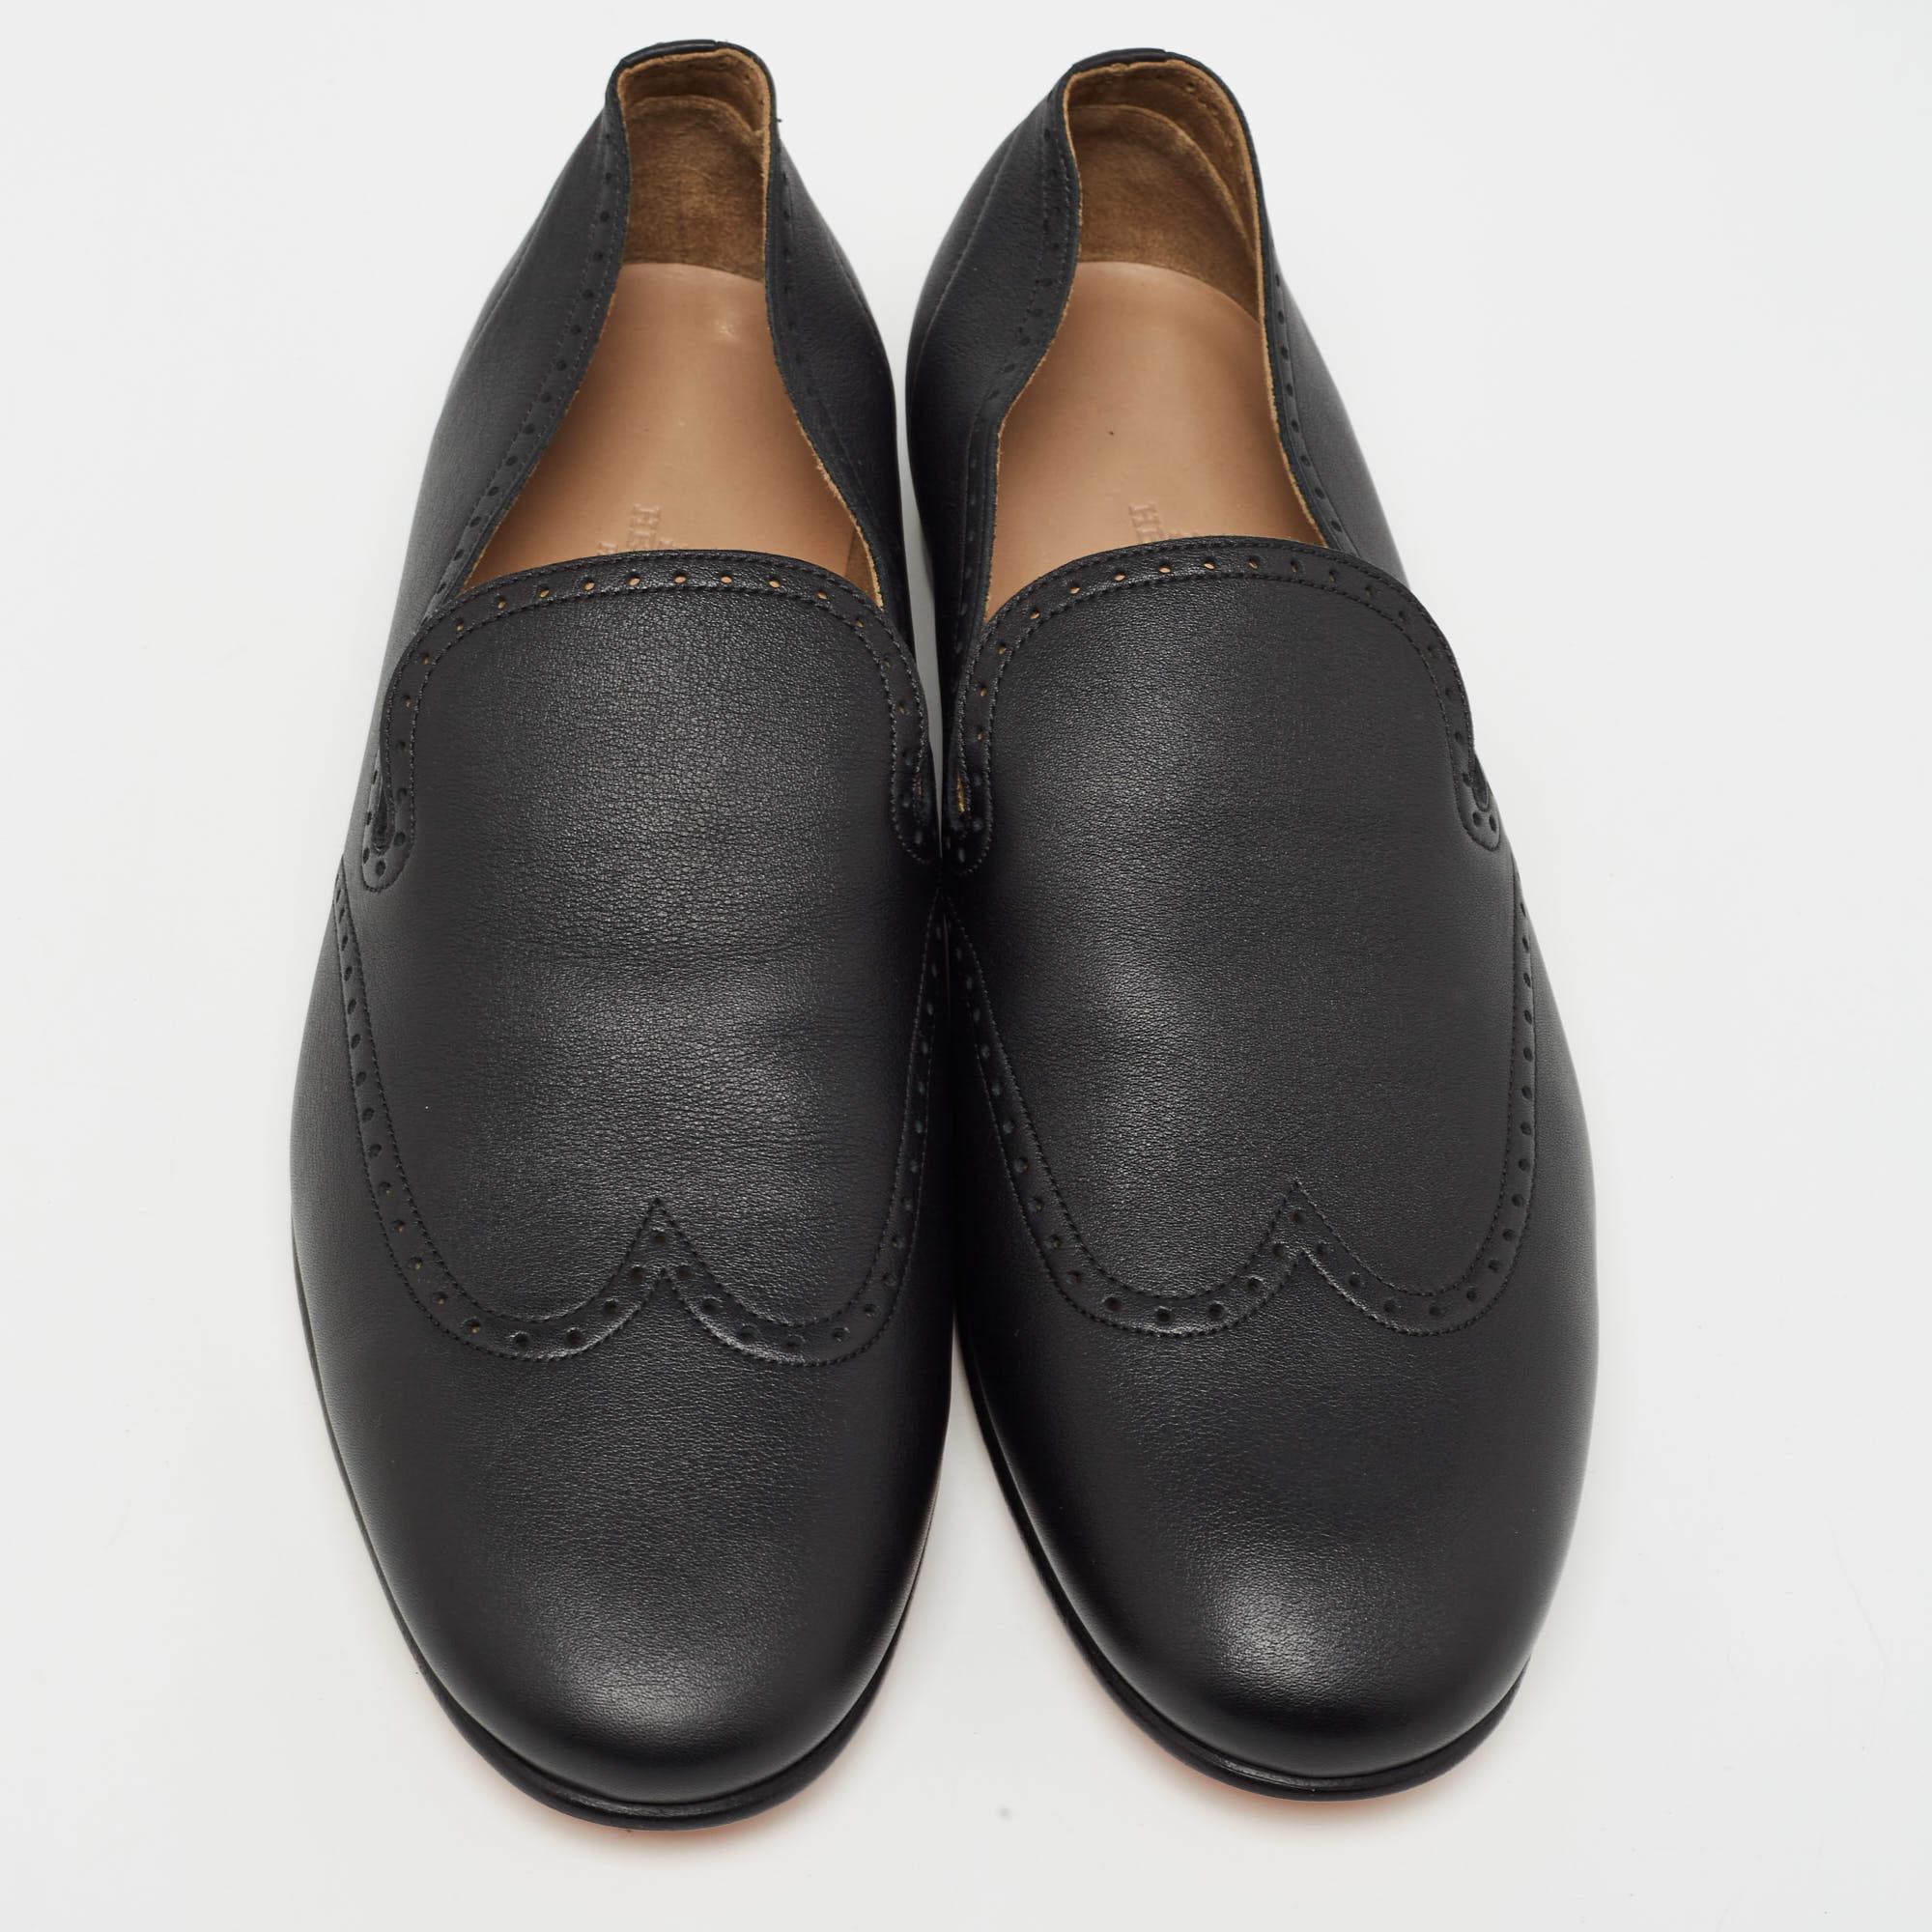 To perfectly complement your attires, we bring you this pair of Hermès loafers that speak nothing but style. The shoes have been crafted with skill and are designed to be easy to slip on. They are just the right choice to complement your fashionable